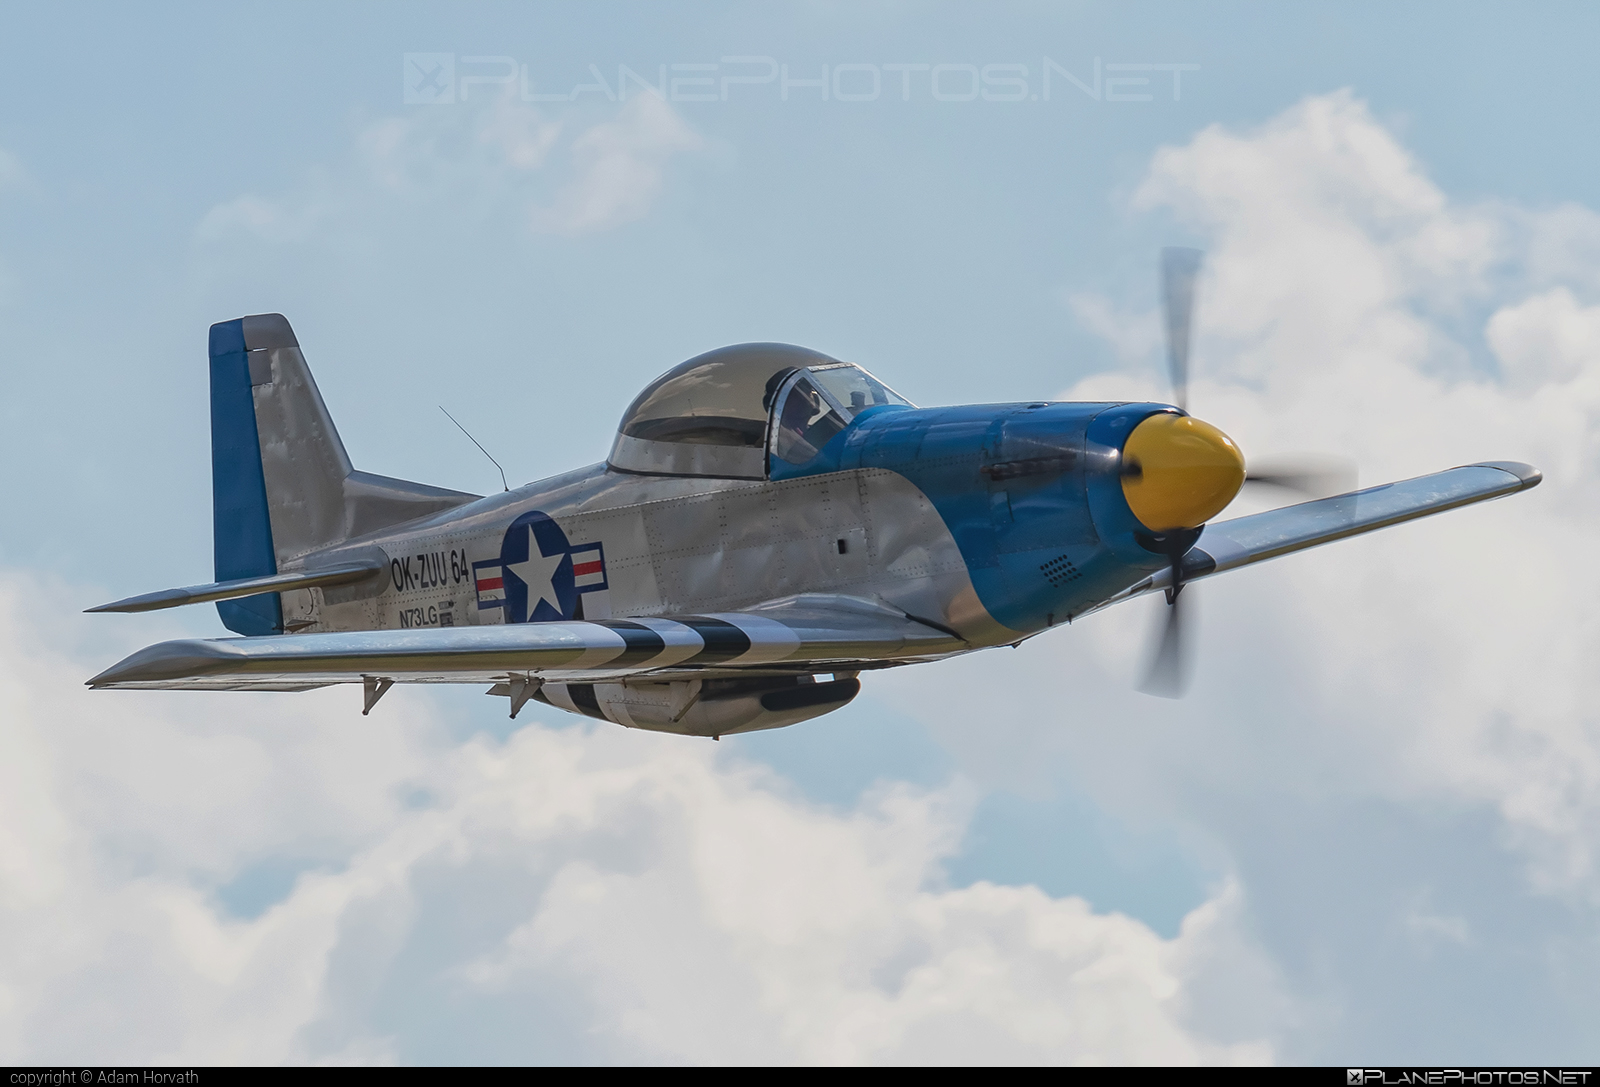 Titan T-51 Mustang - OK-ZUU 64 operated by Private operator #mustang #t51 #t51mustang #titanT51mustang